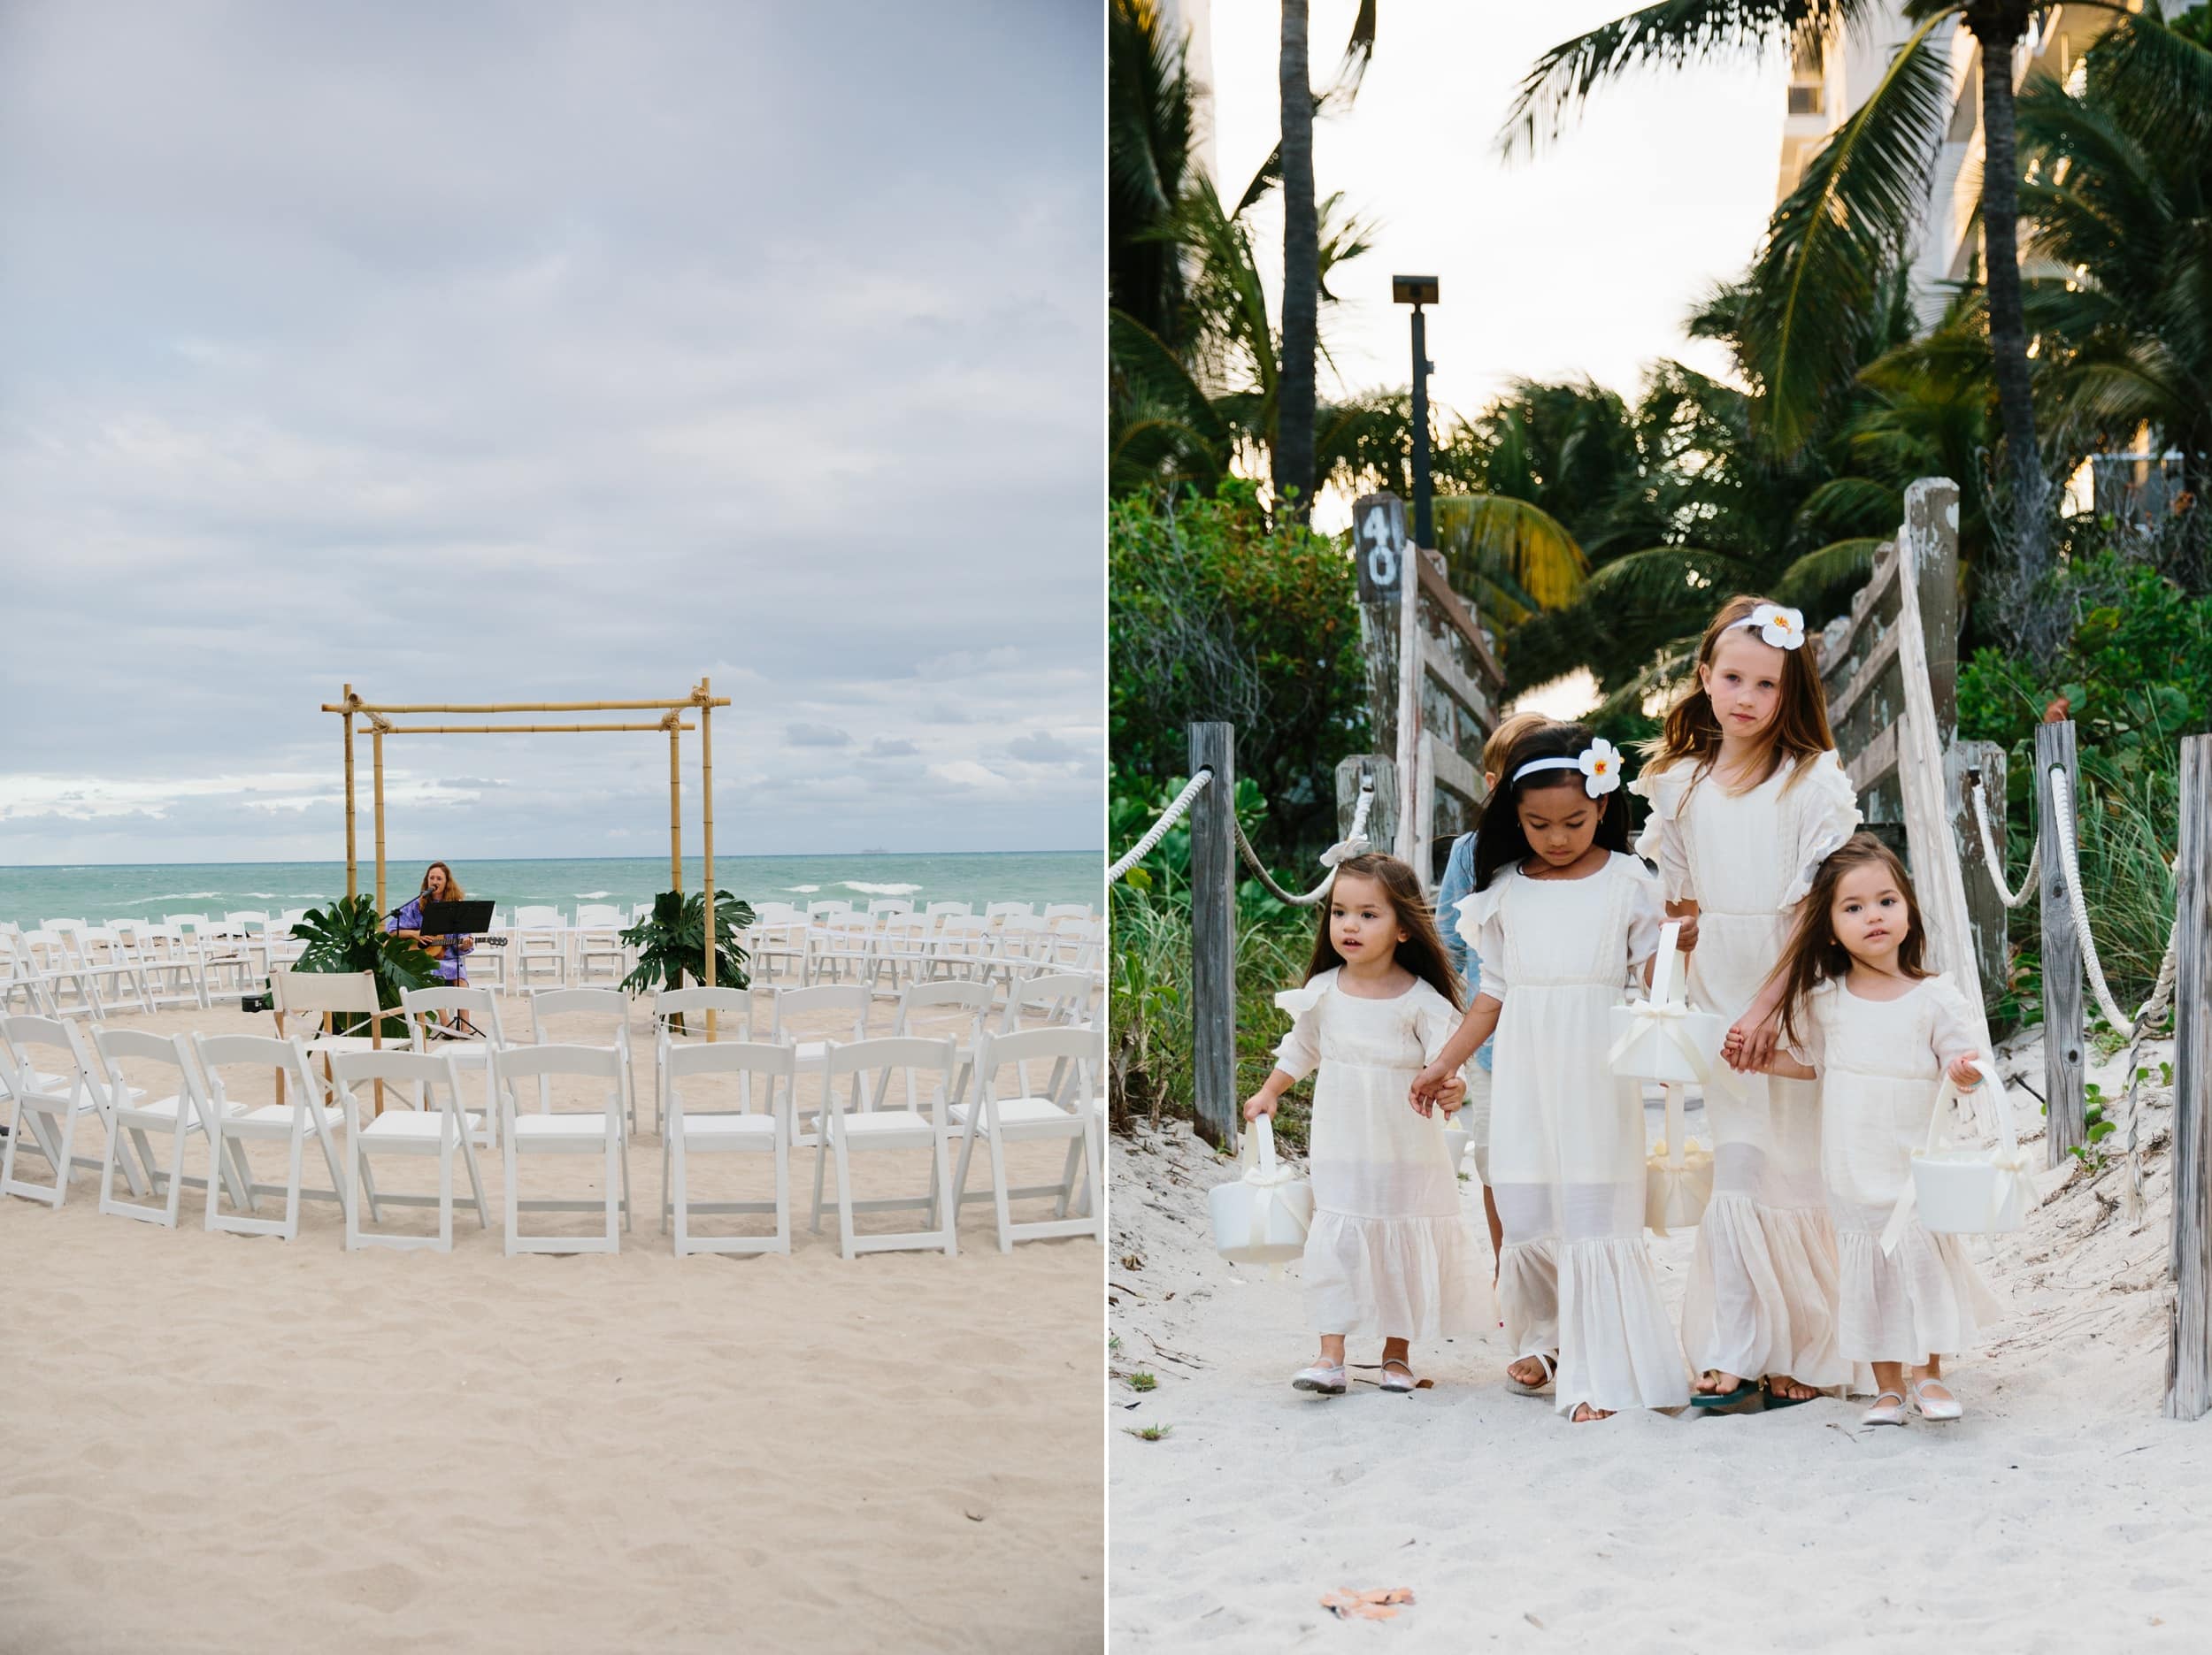 Casual chic wedding at the Cadillac Hotel in Miami beach